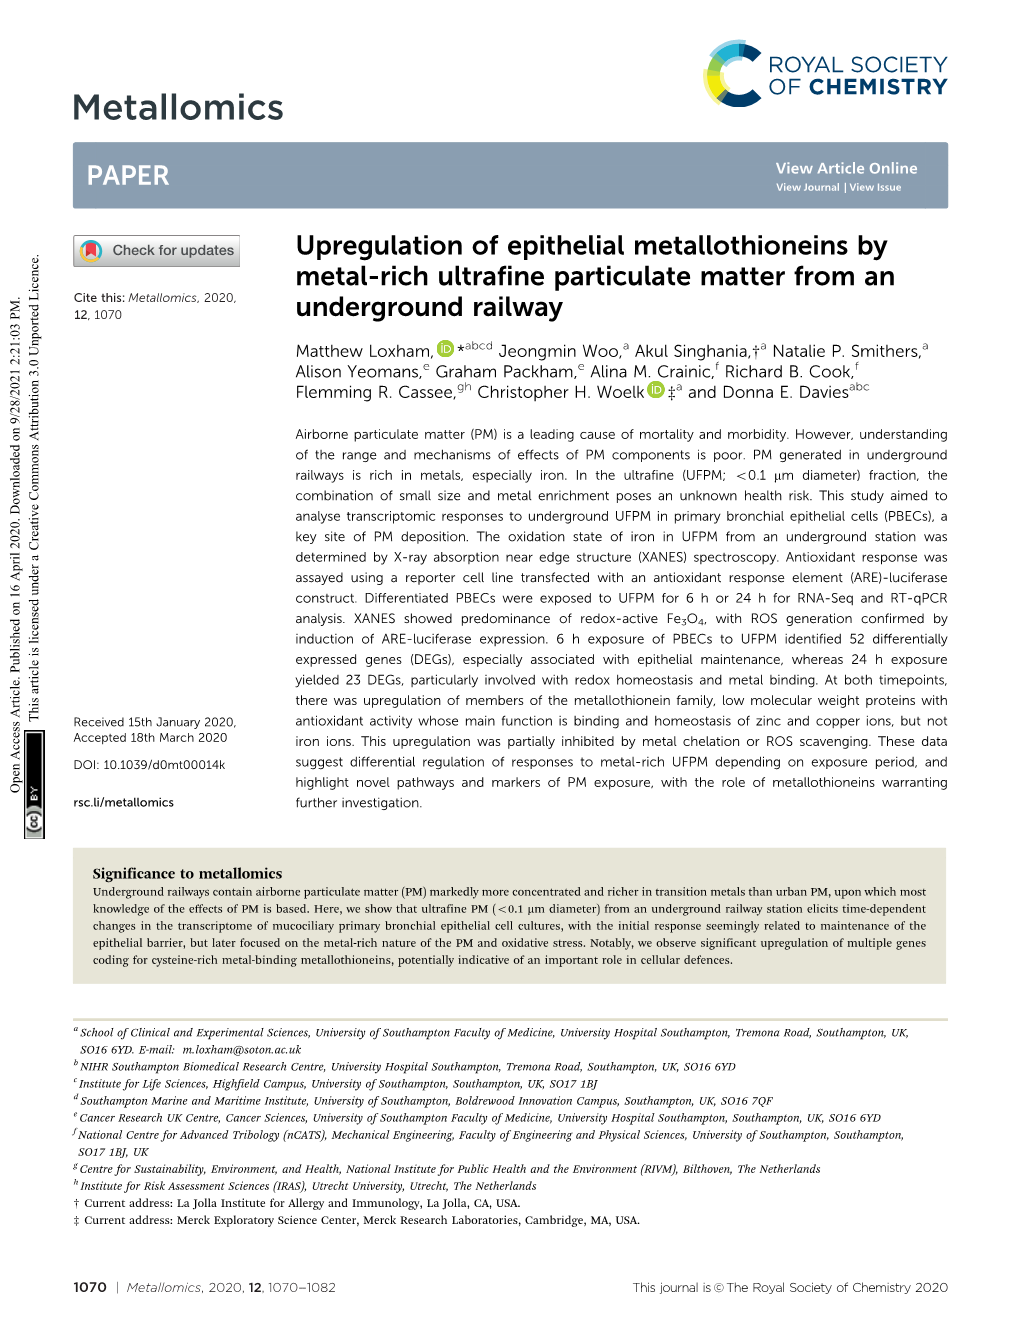 Upregulation of Epithelial Metallothioneins by Metal-Rich Ultrafine Particulate Matter from an Cite This: Metallomics, 2020, 12,1070 Underground Railway